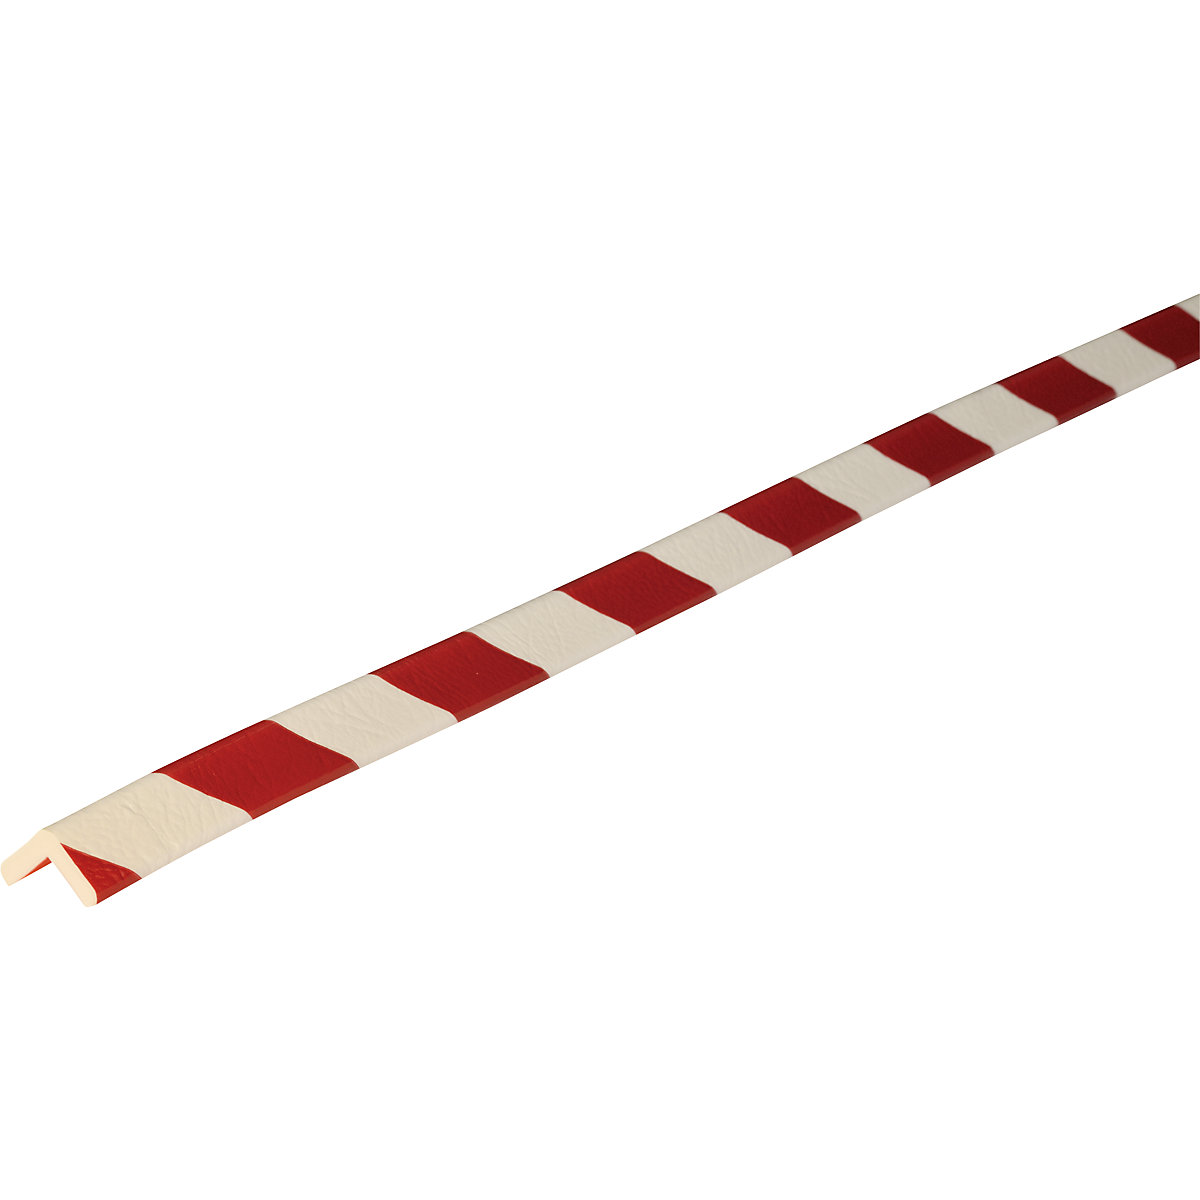 Knuffi® corner protection – SHG, type E, cut to size, sold by the metre, red / white-13